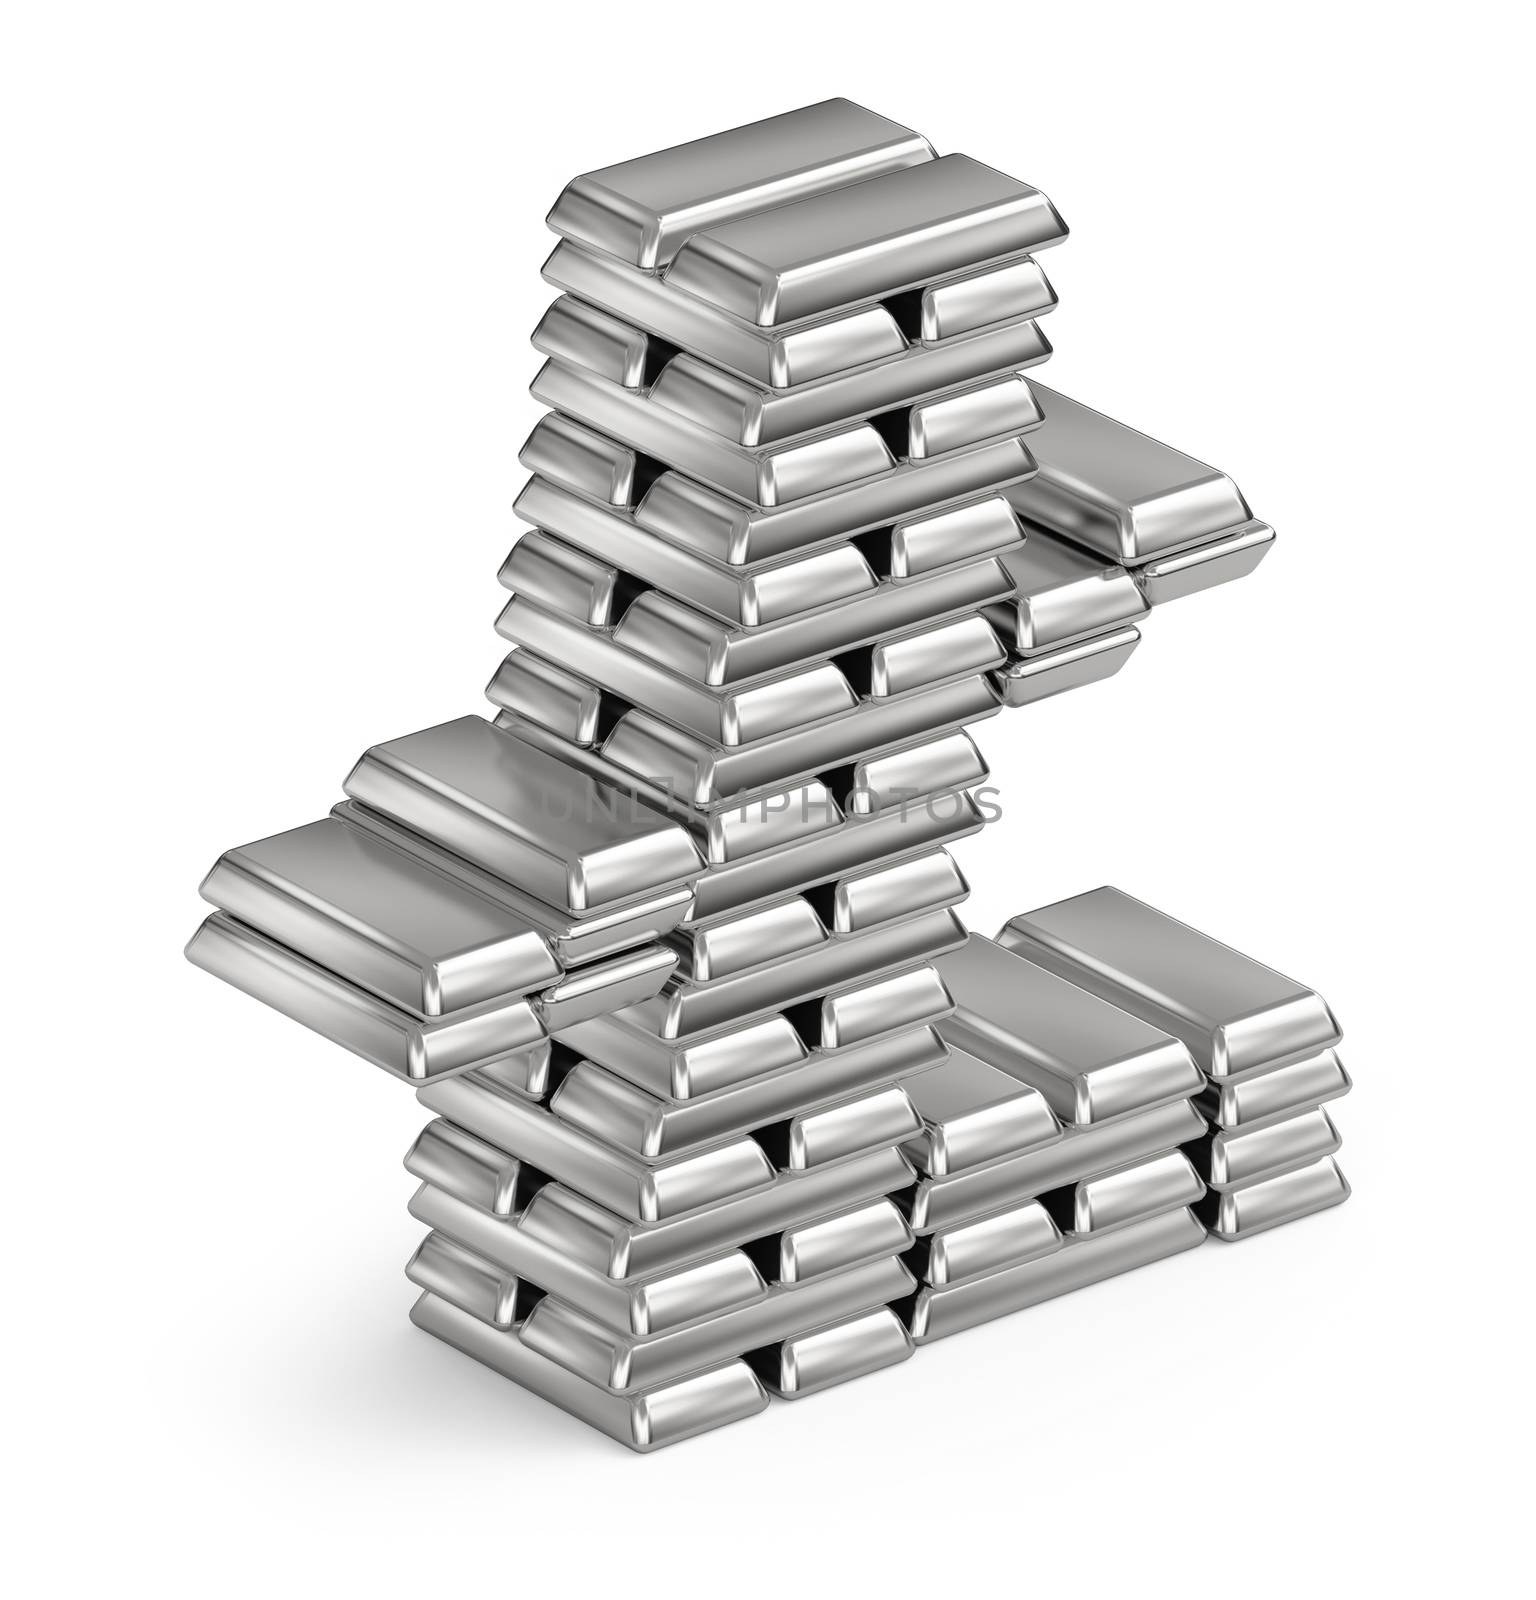 Litecoin symbol from stacked silver bars 3d in isometric on white background